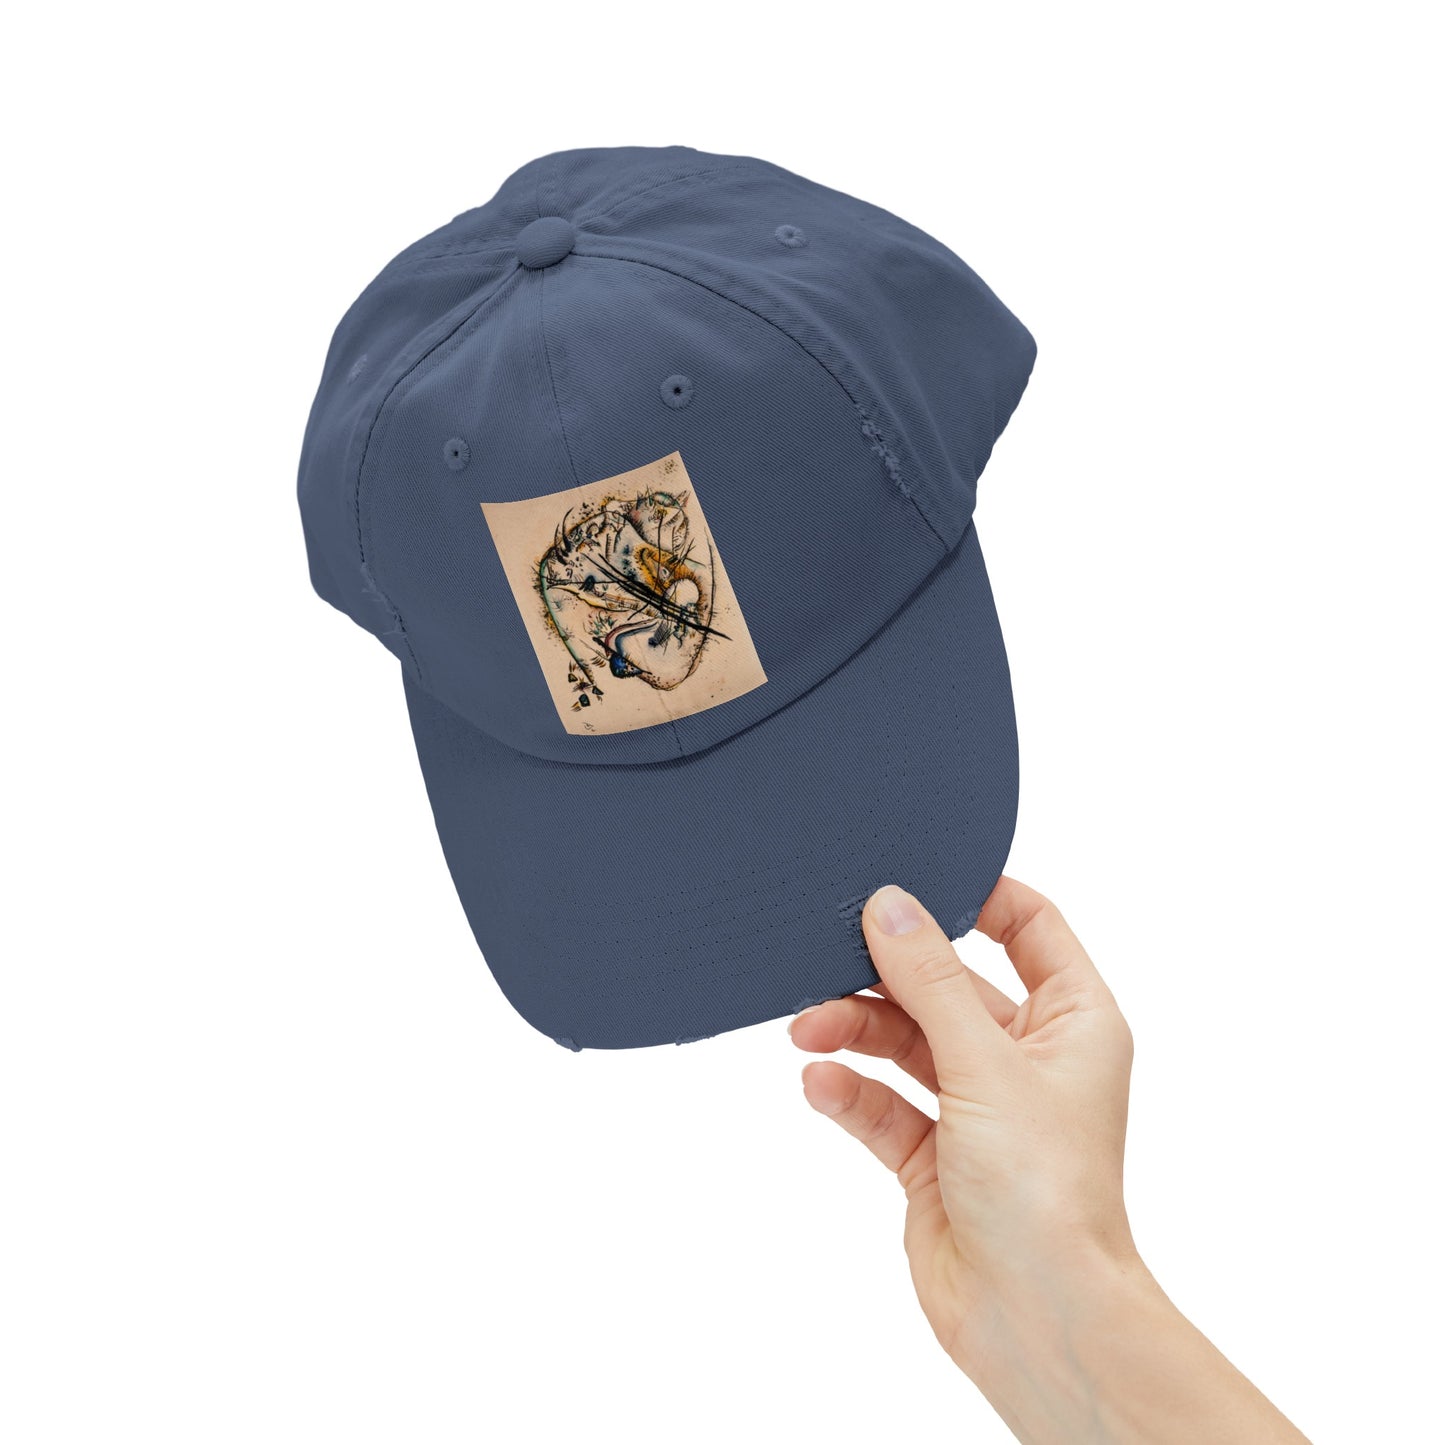 a blue hat with a picture of a dragon on it